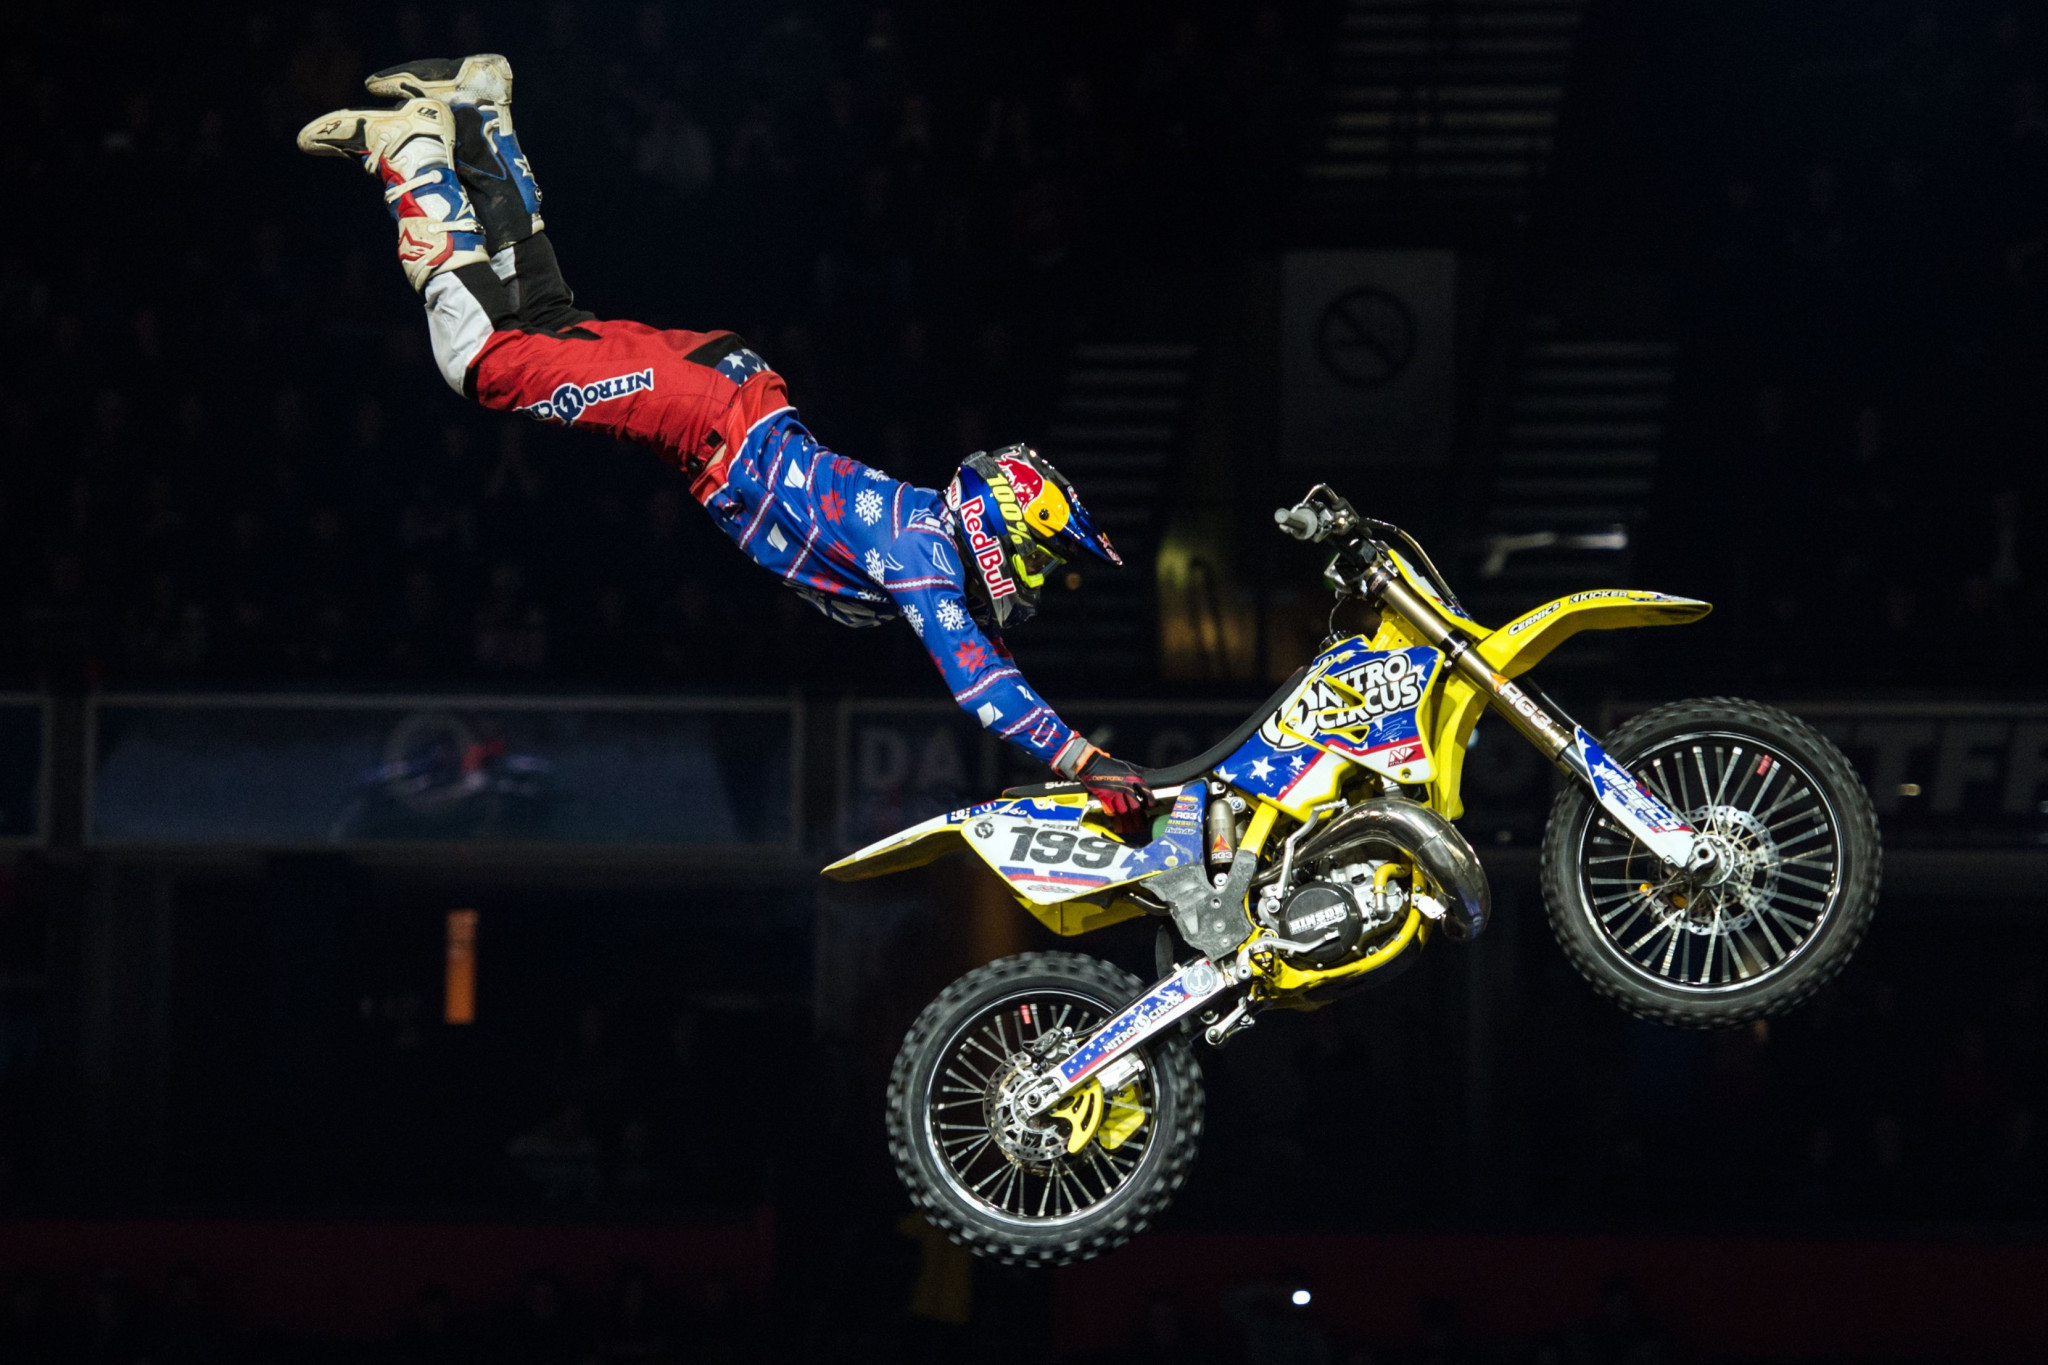 Nitro Circus announces partnership with Indigo Road Entertainment and promises North American shows in 2021